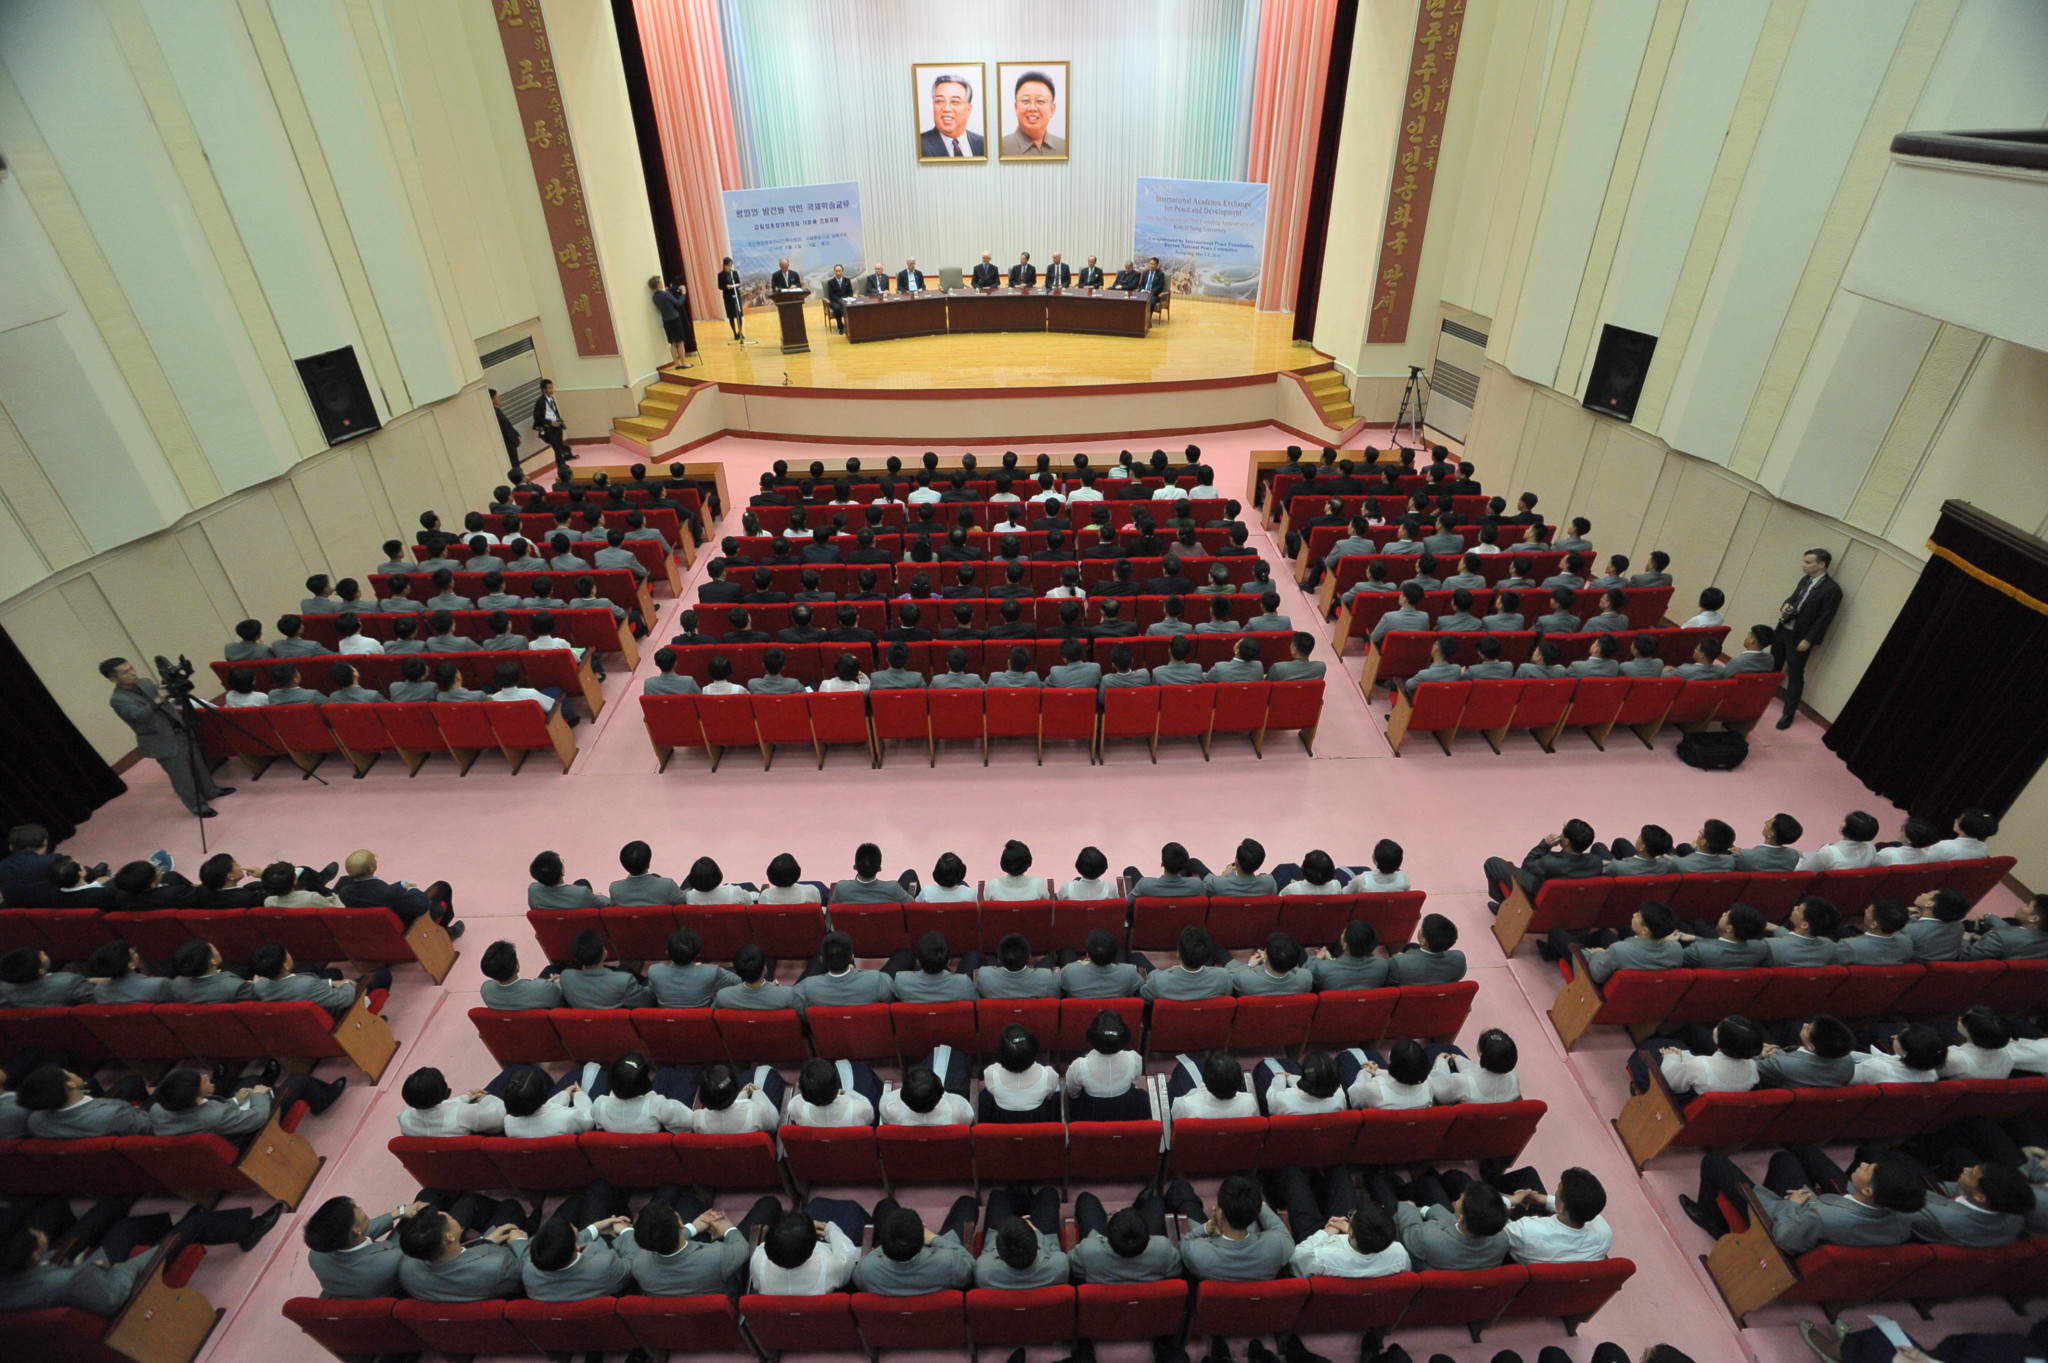 43 Closing ceremony of the BRIDGES events in the DPRK